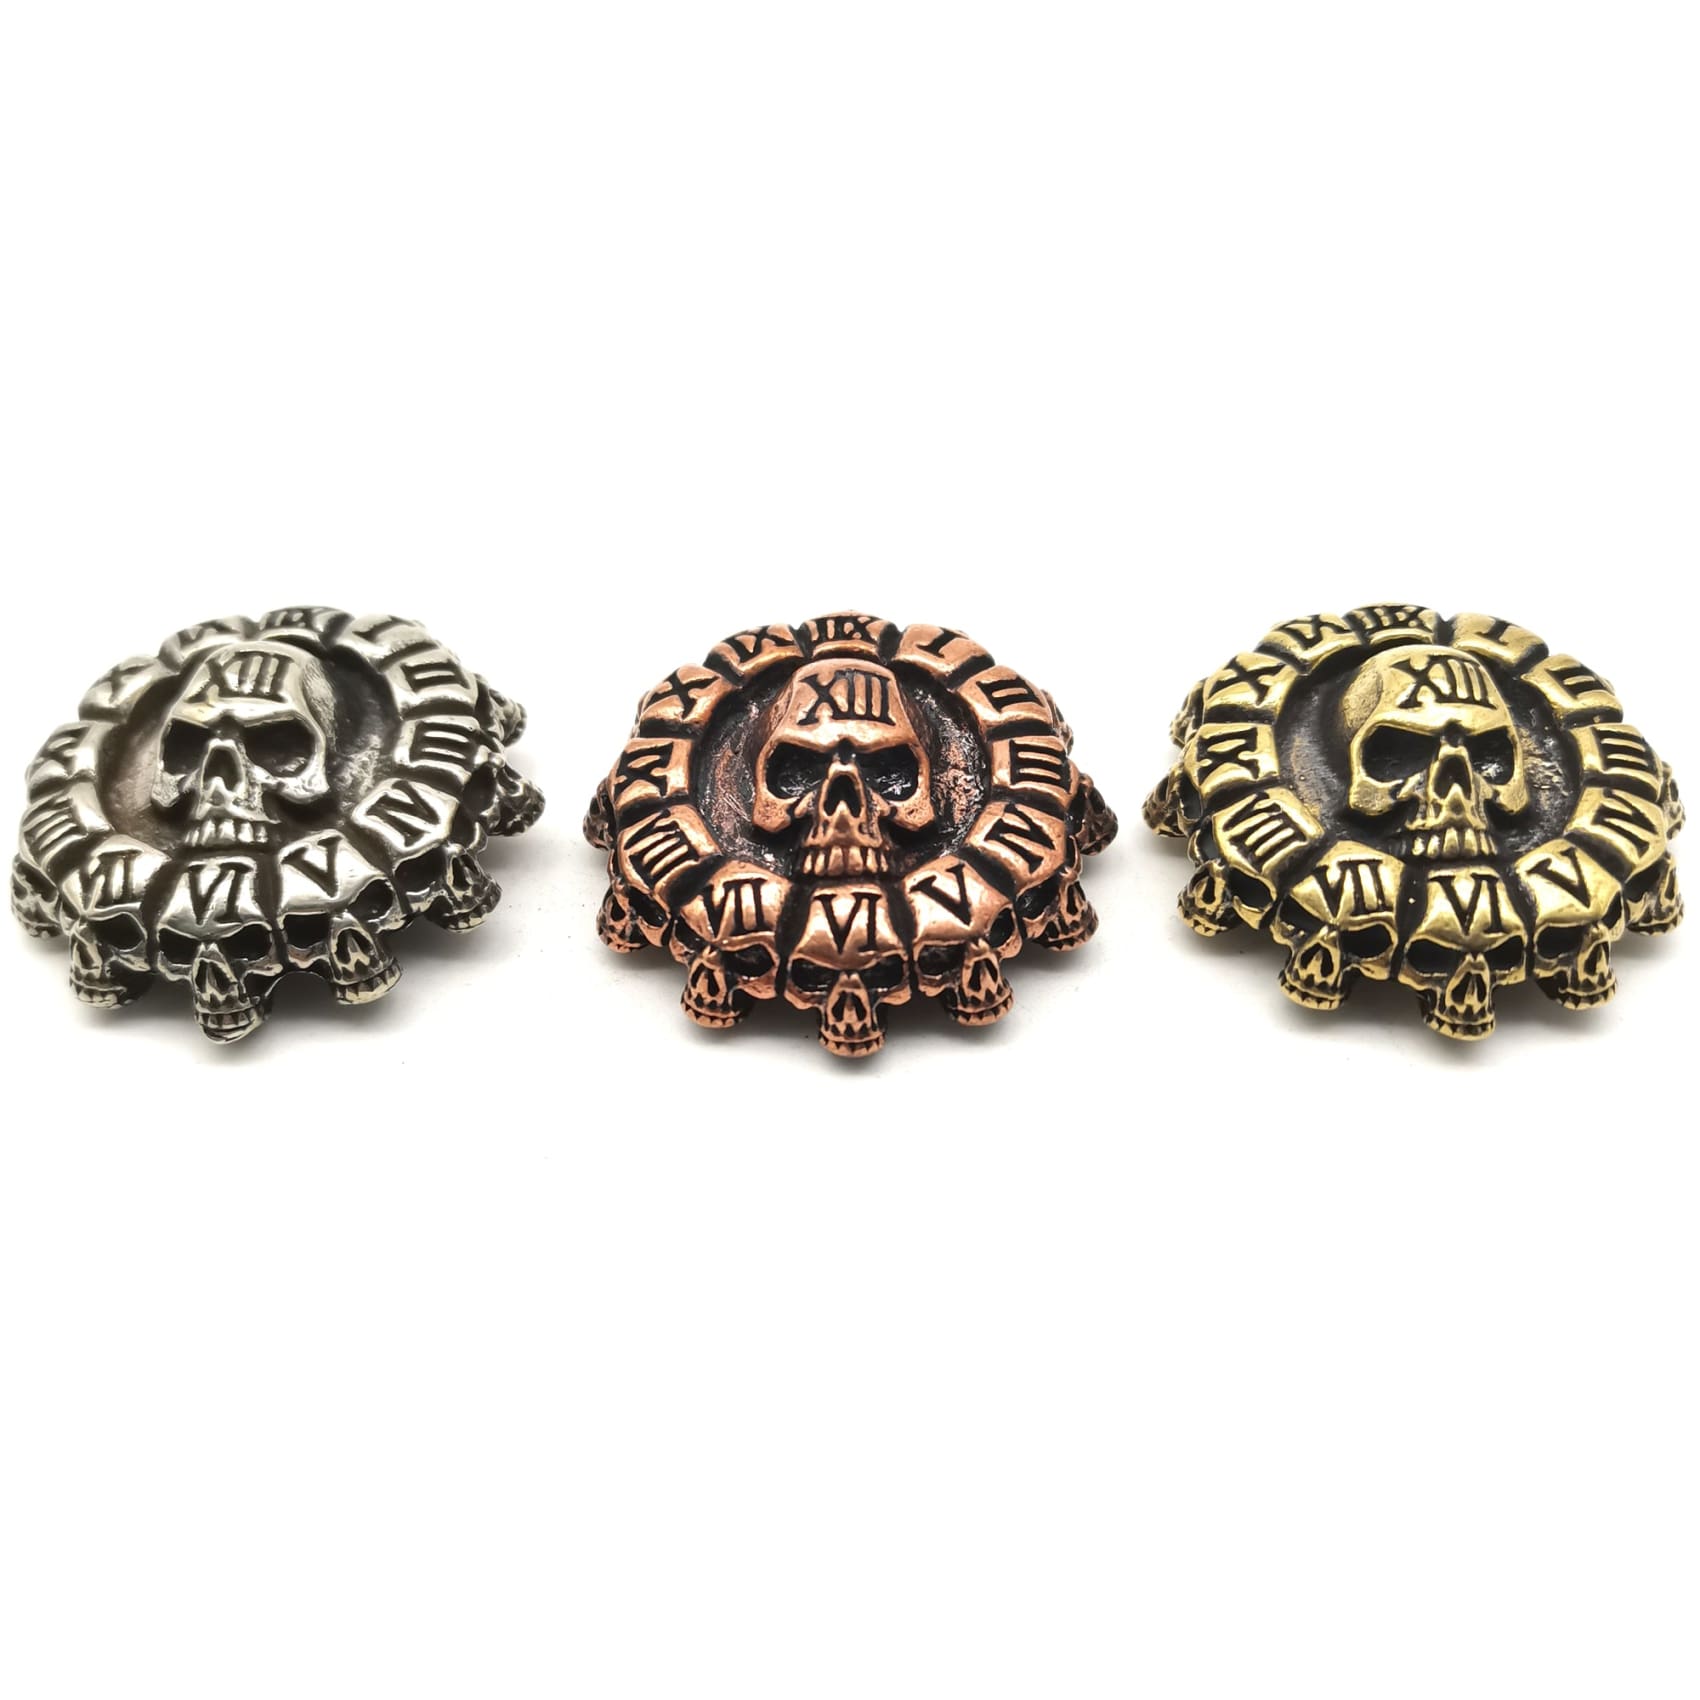 40mm Copper Casted Death Skull Conchos Screw Back Leather Bag Decoration Accessories - Concho